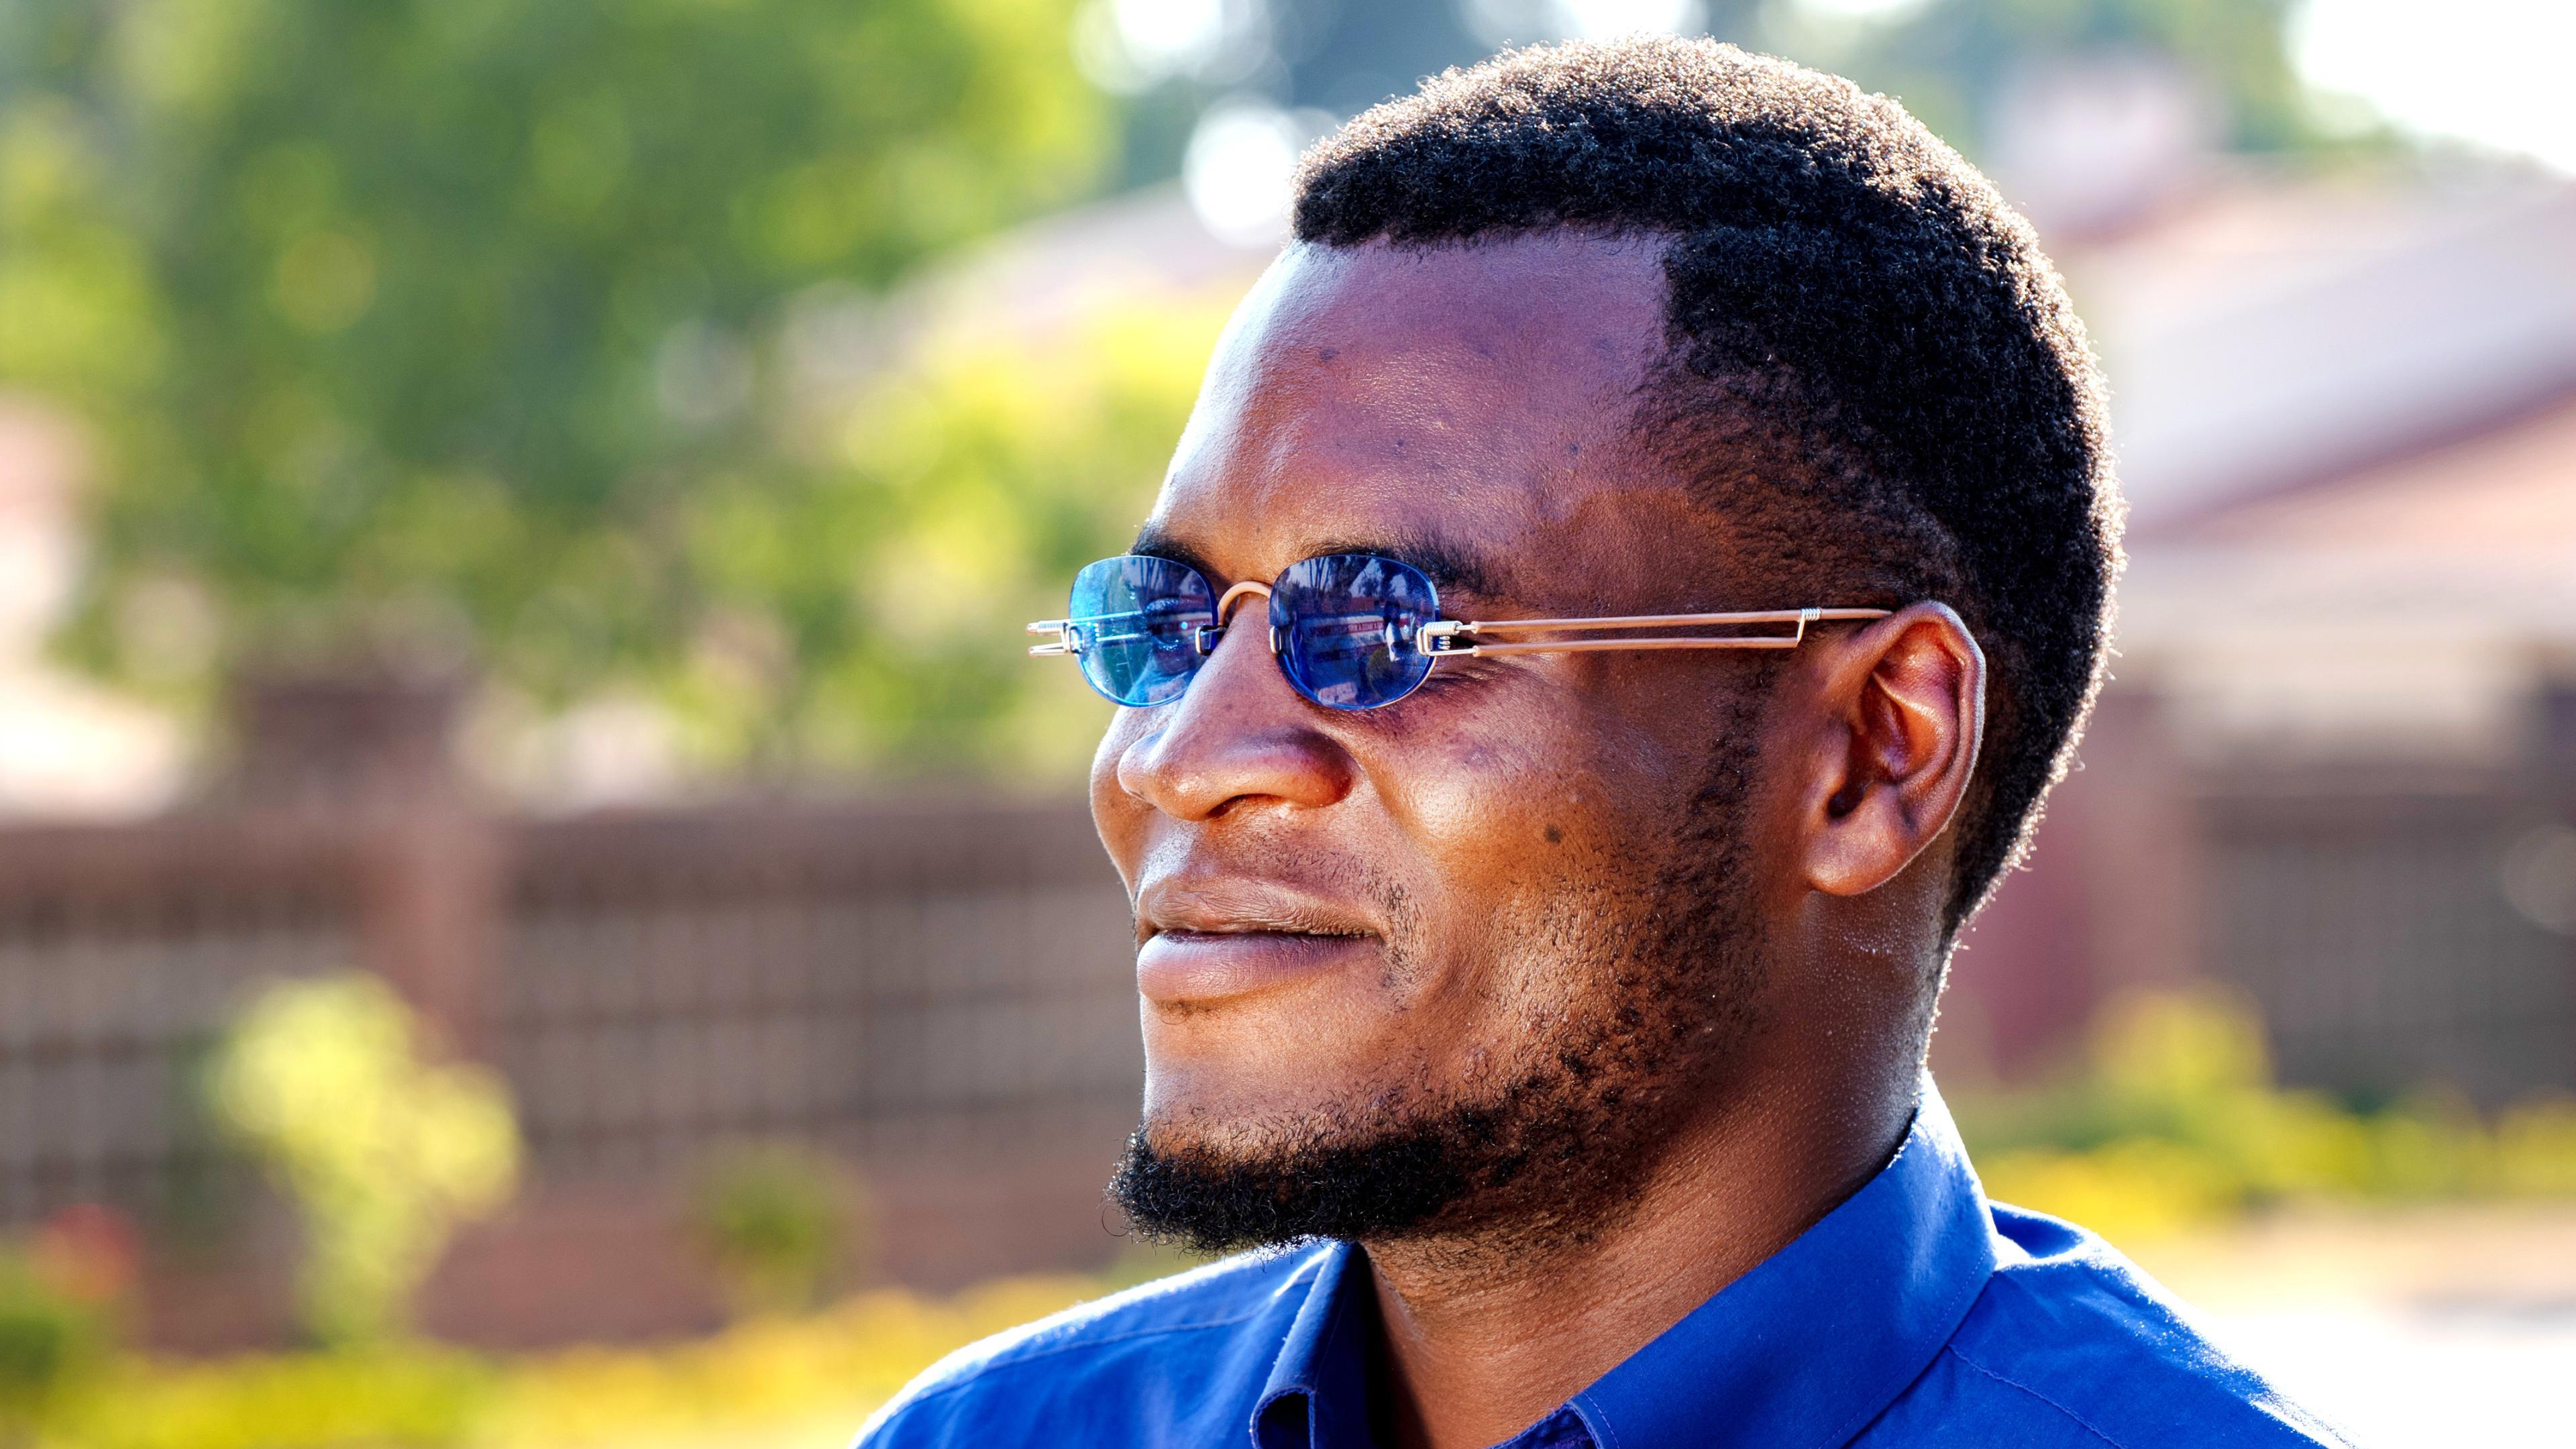 Malawian man with OneDollarGlasses Sunglasses with large lenses